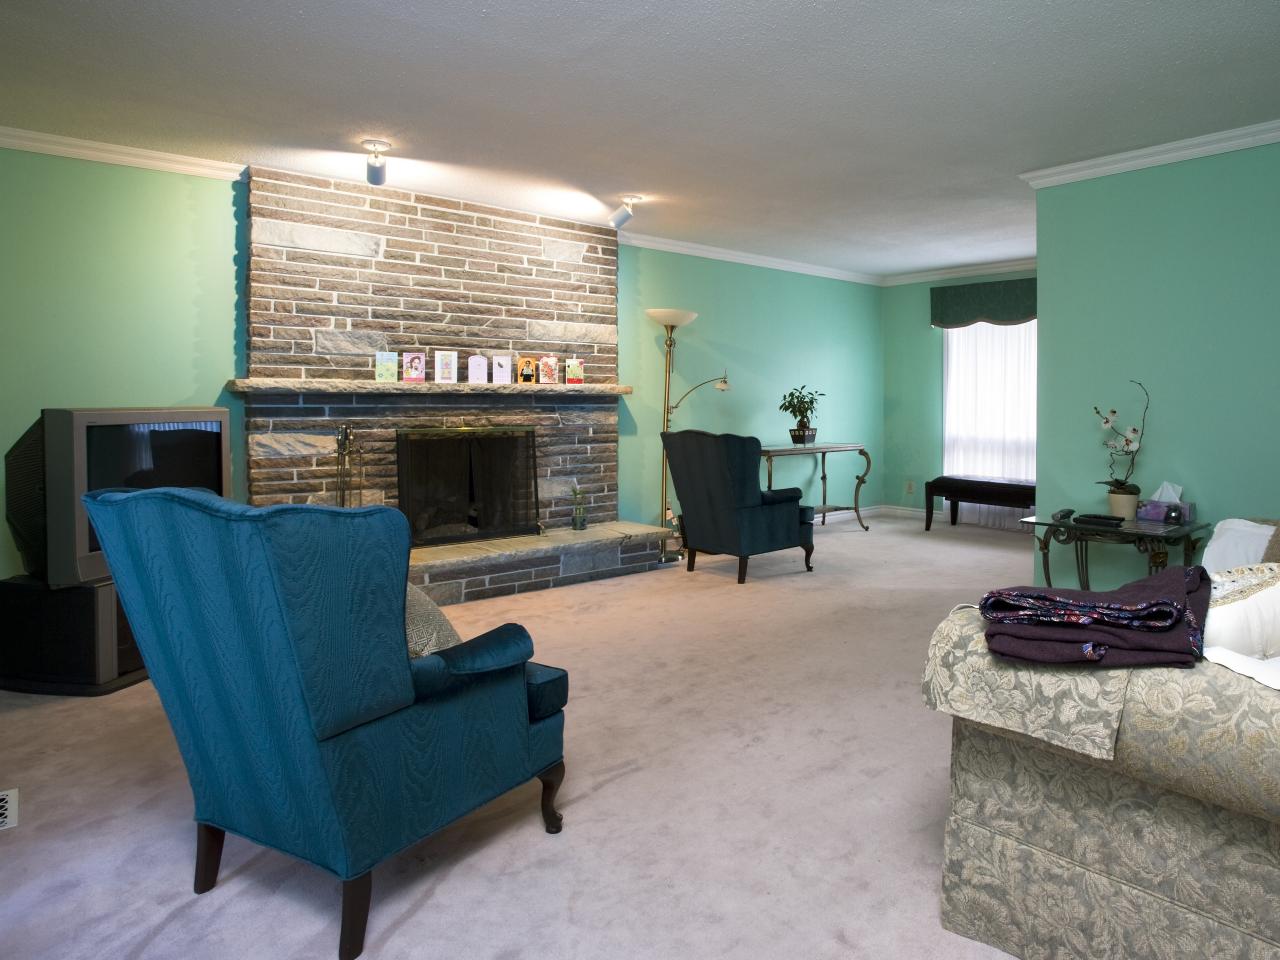 Mint walls enhance the cozy feeling of your living room